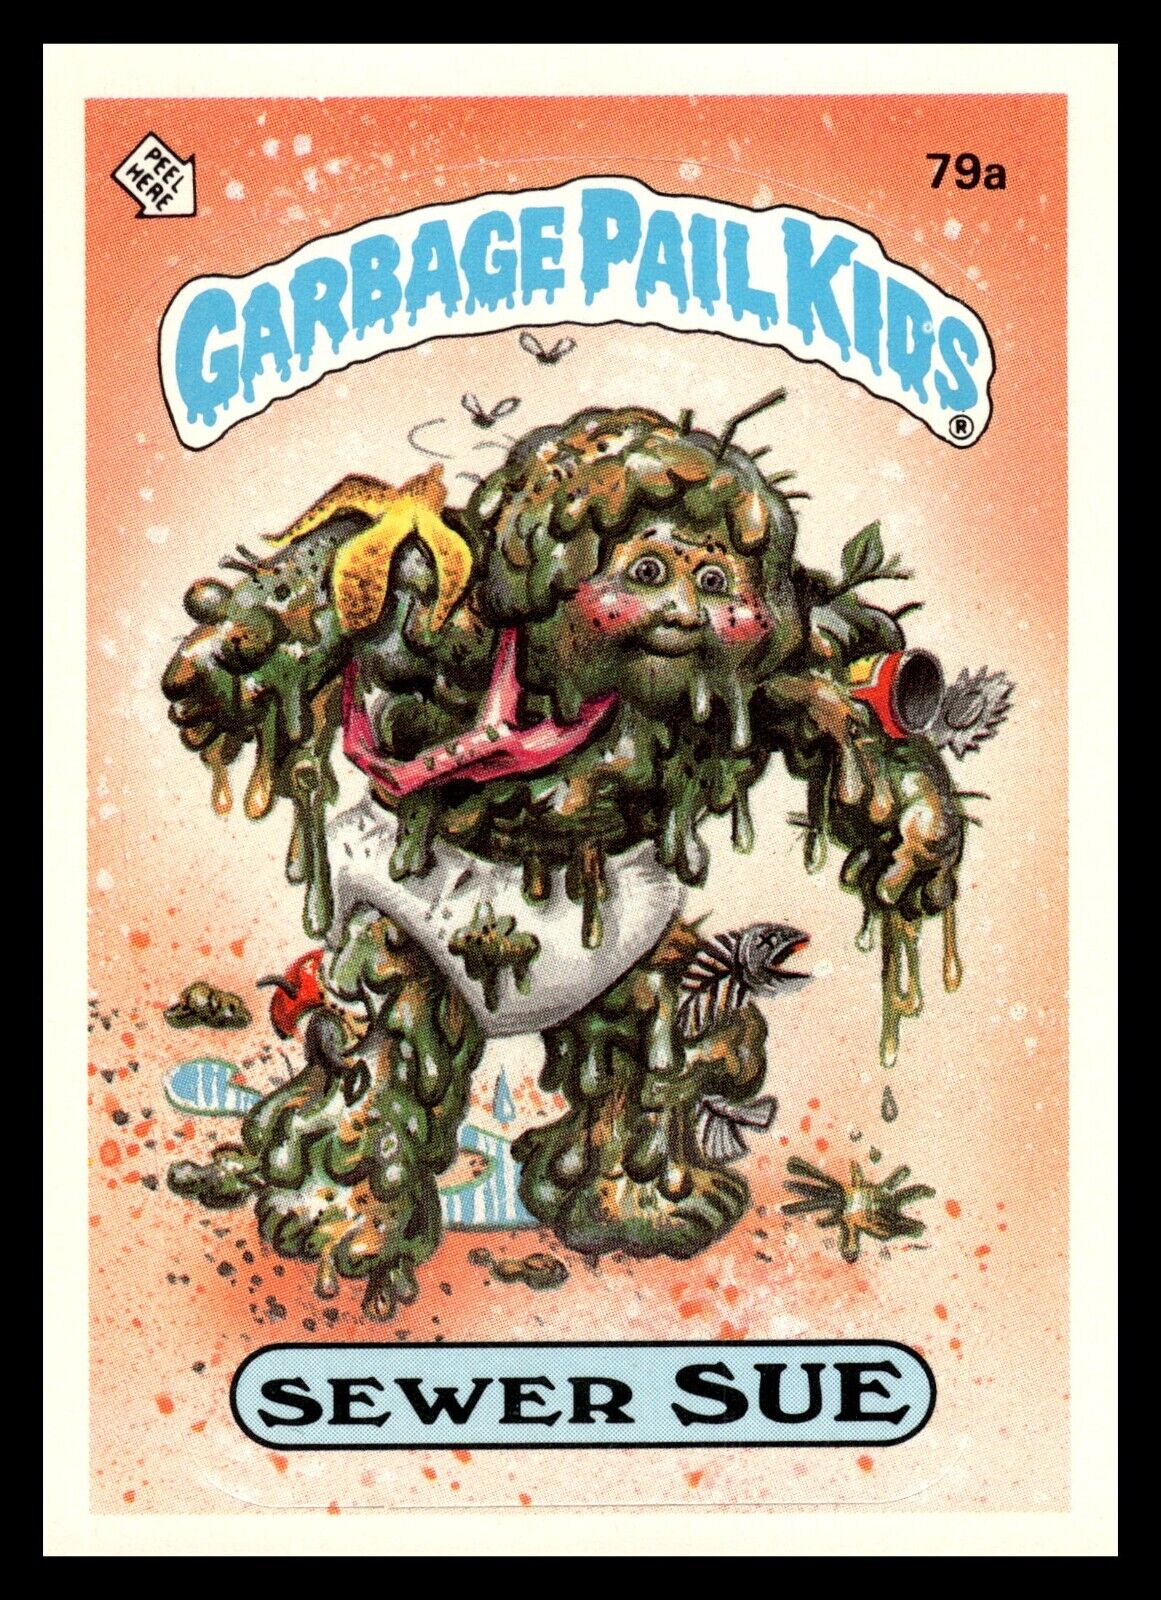 1985 Topps Garbage Pail Kids GPK Series 2 OS2 Sewer SUE 79a LM Puzzle Glossy